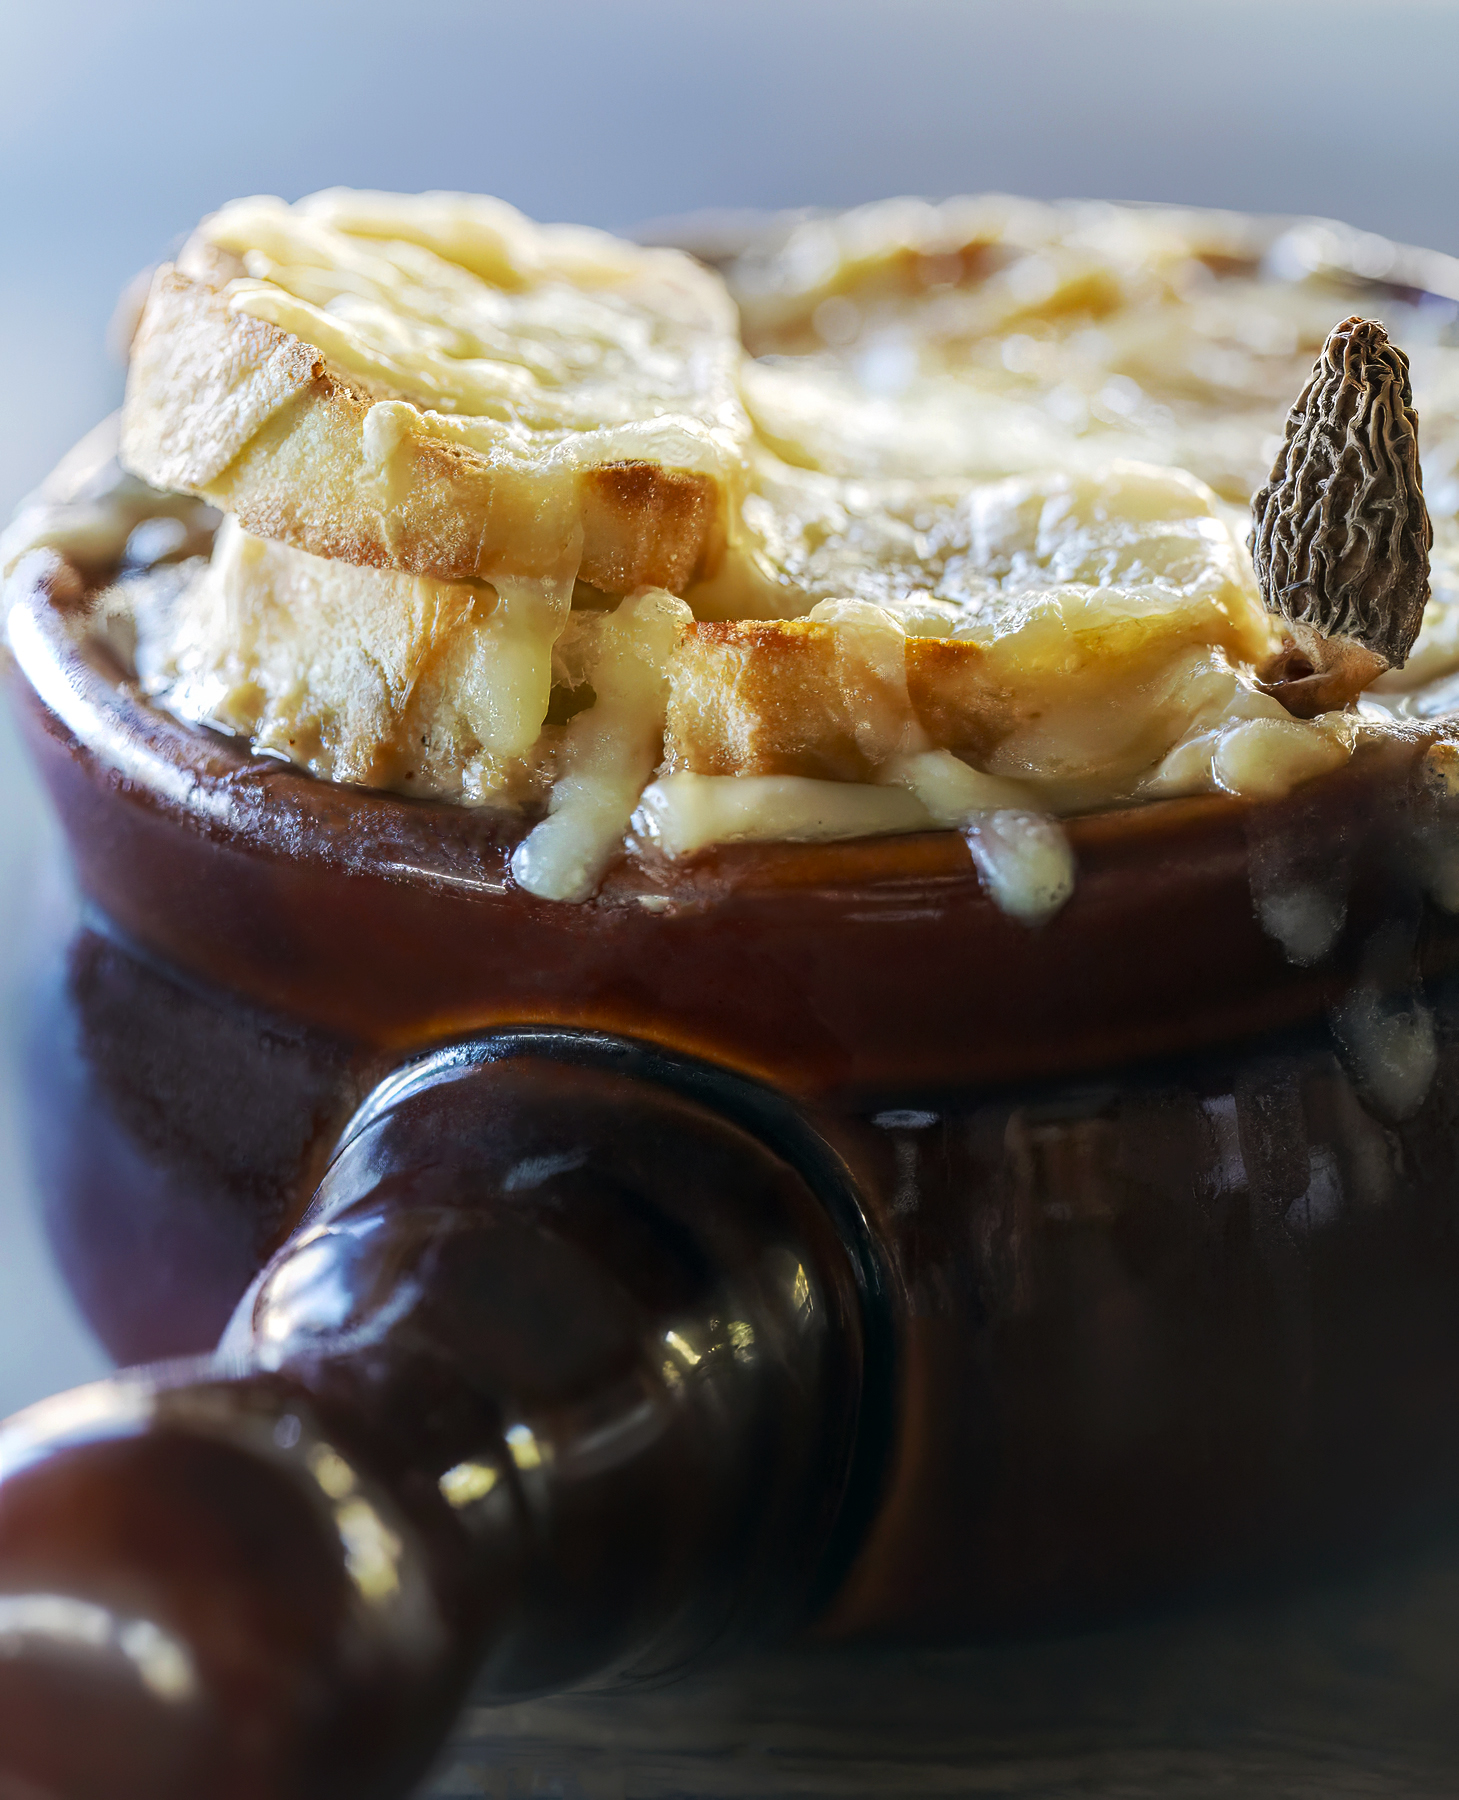 Soup tureen filled with wild morel mushroom and onion, acorn soup and topped with cheese, a dried morel mushroom and toasted baguette slices.